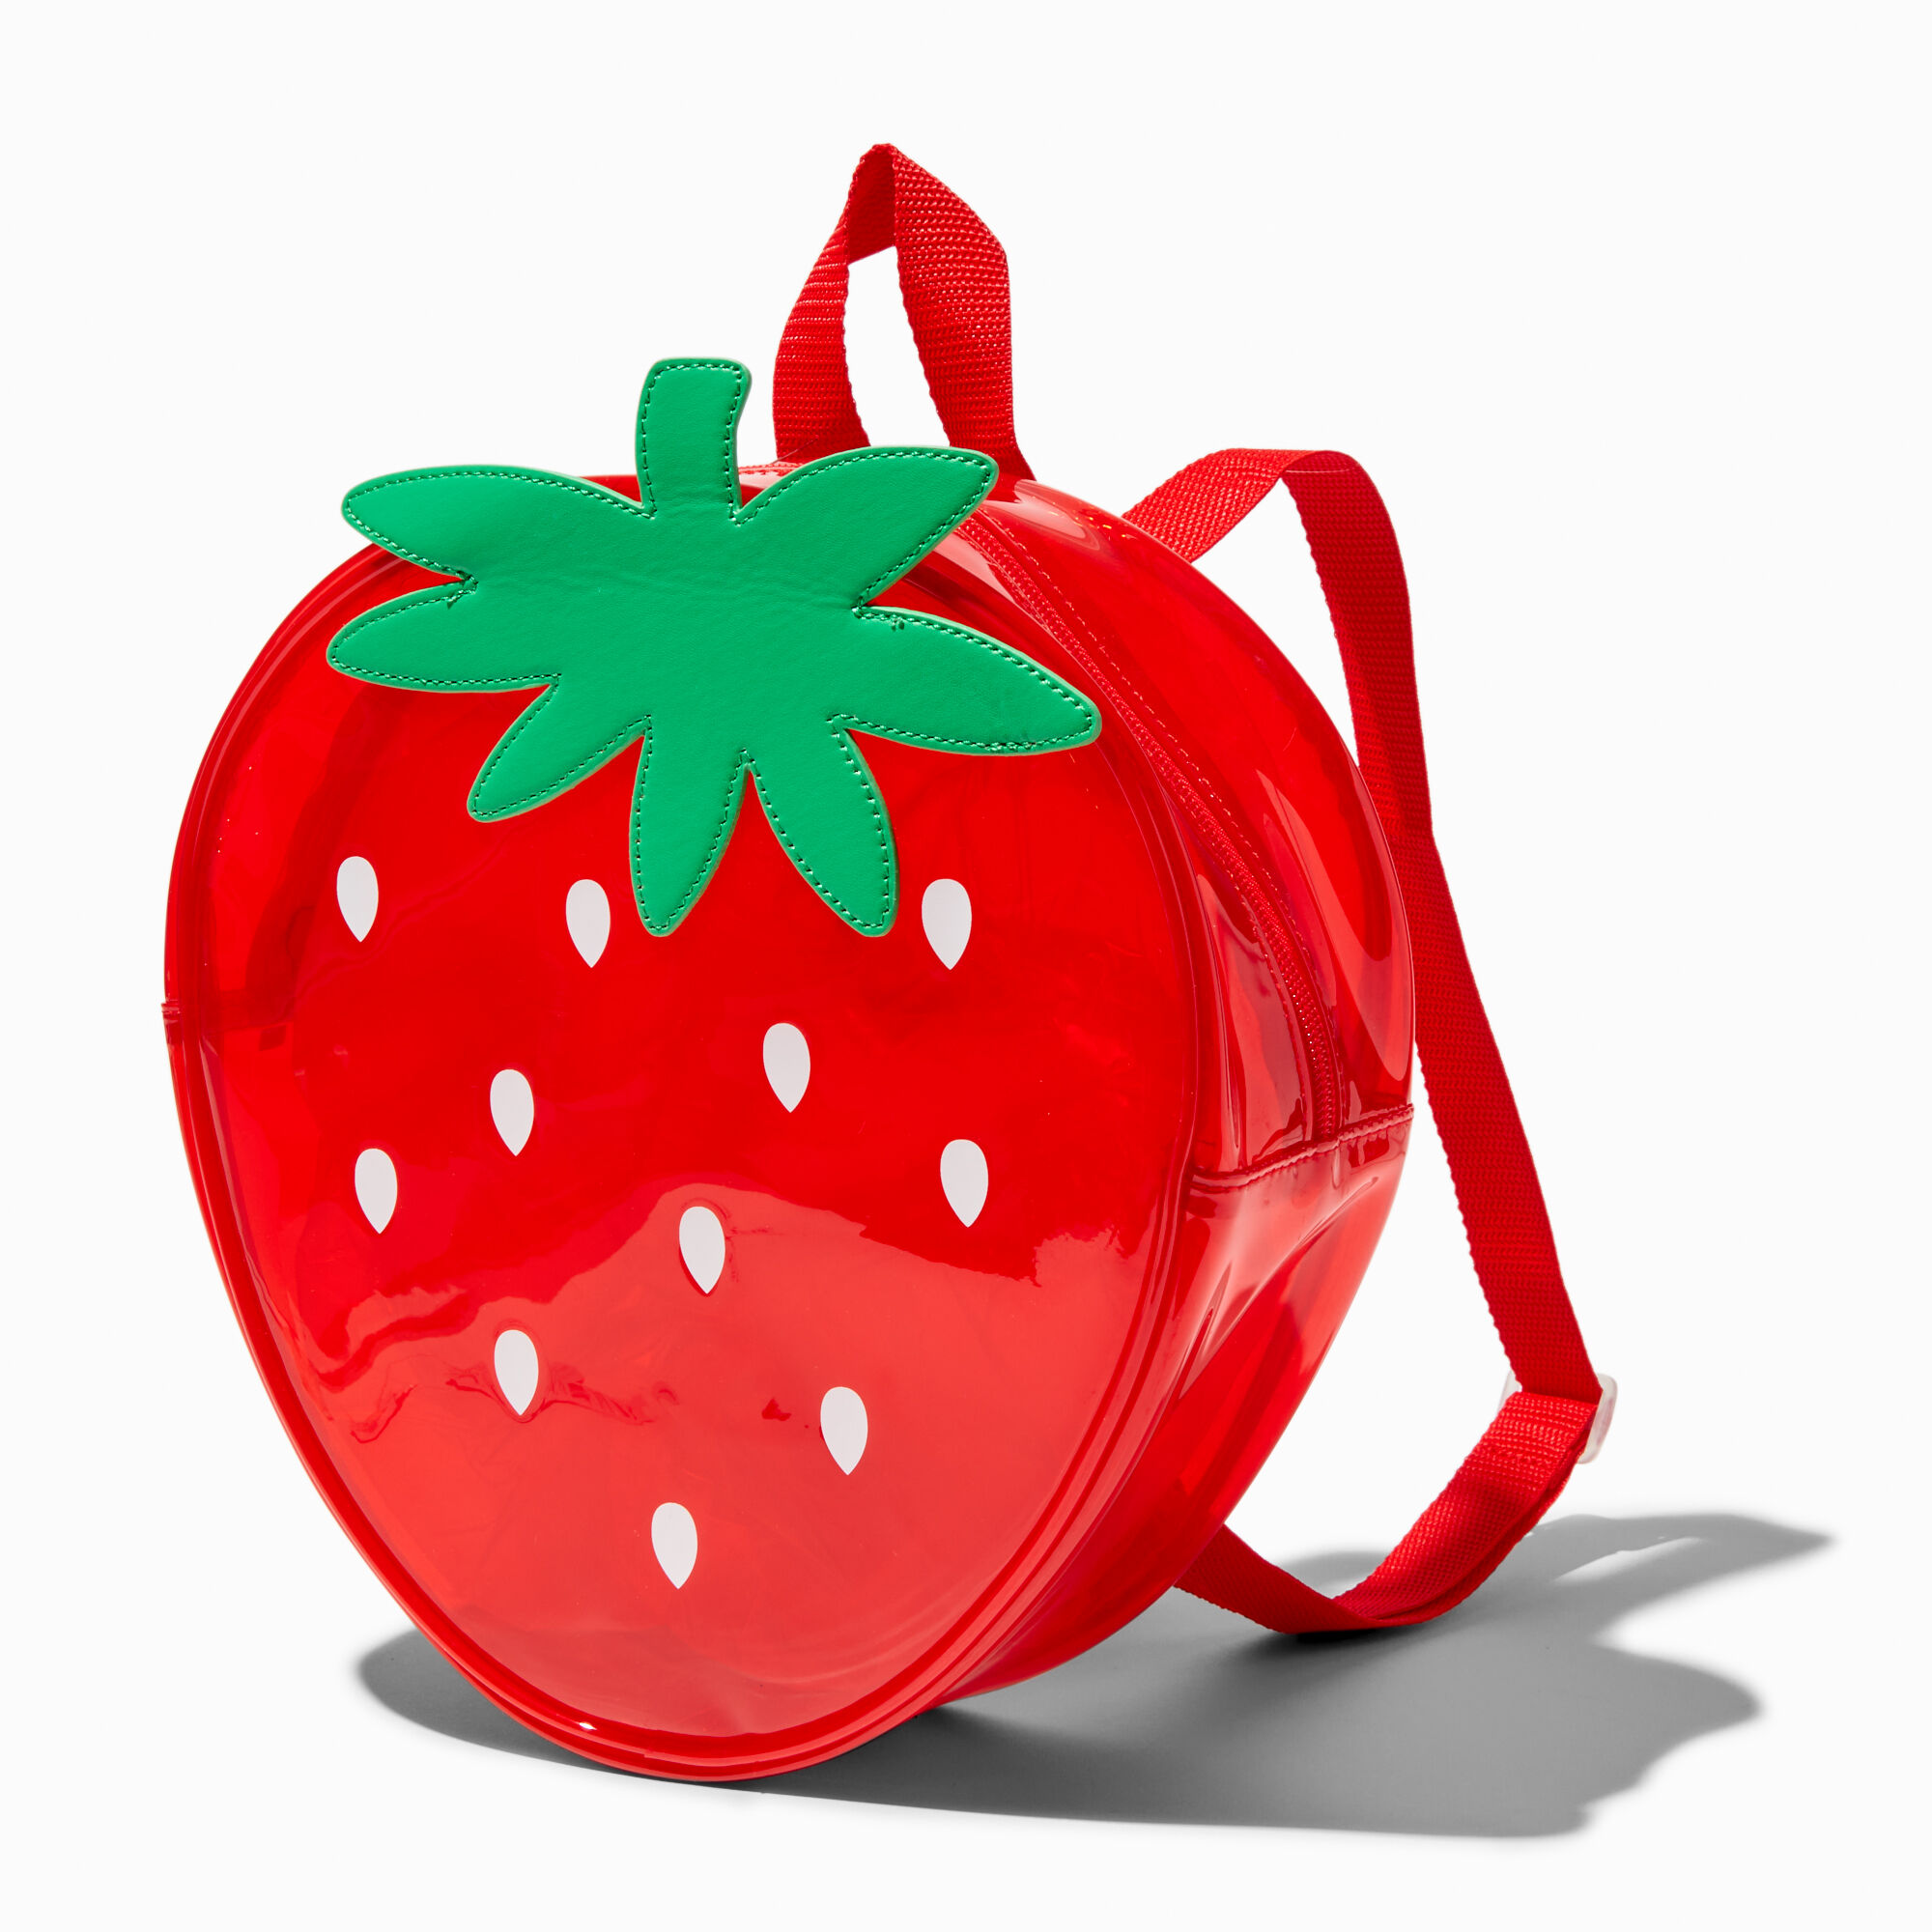 View Claires StrawberryShaped Backpack information